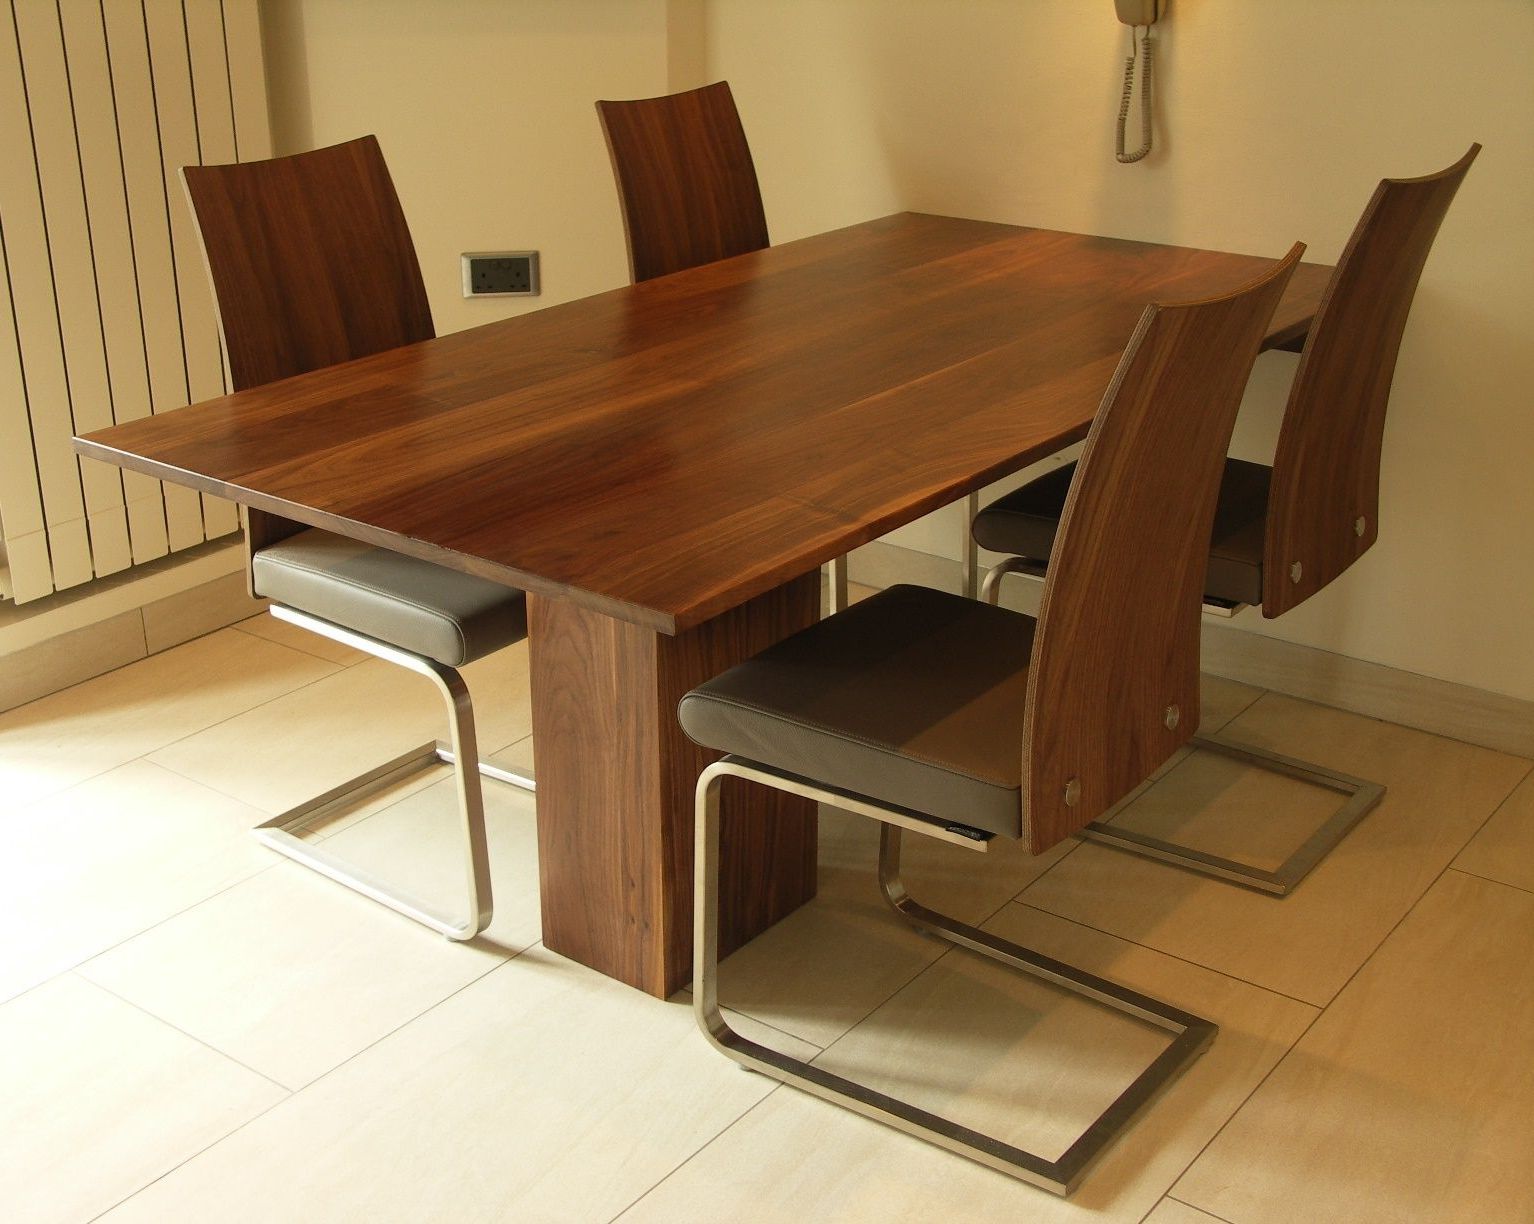 American Black Walnut Dining Table With Matching Regarding 2019 Black And Walnut Dining Tables (View 11 of 15)